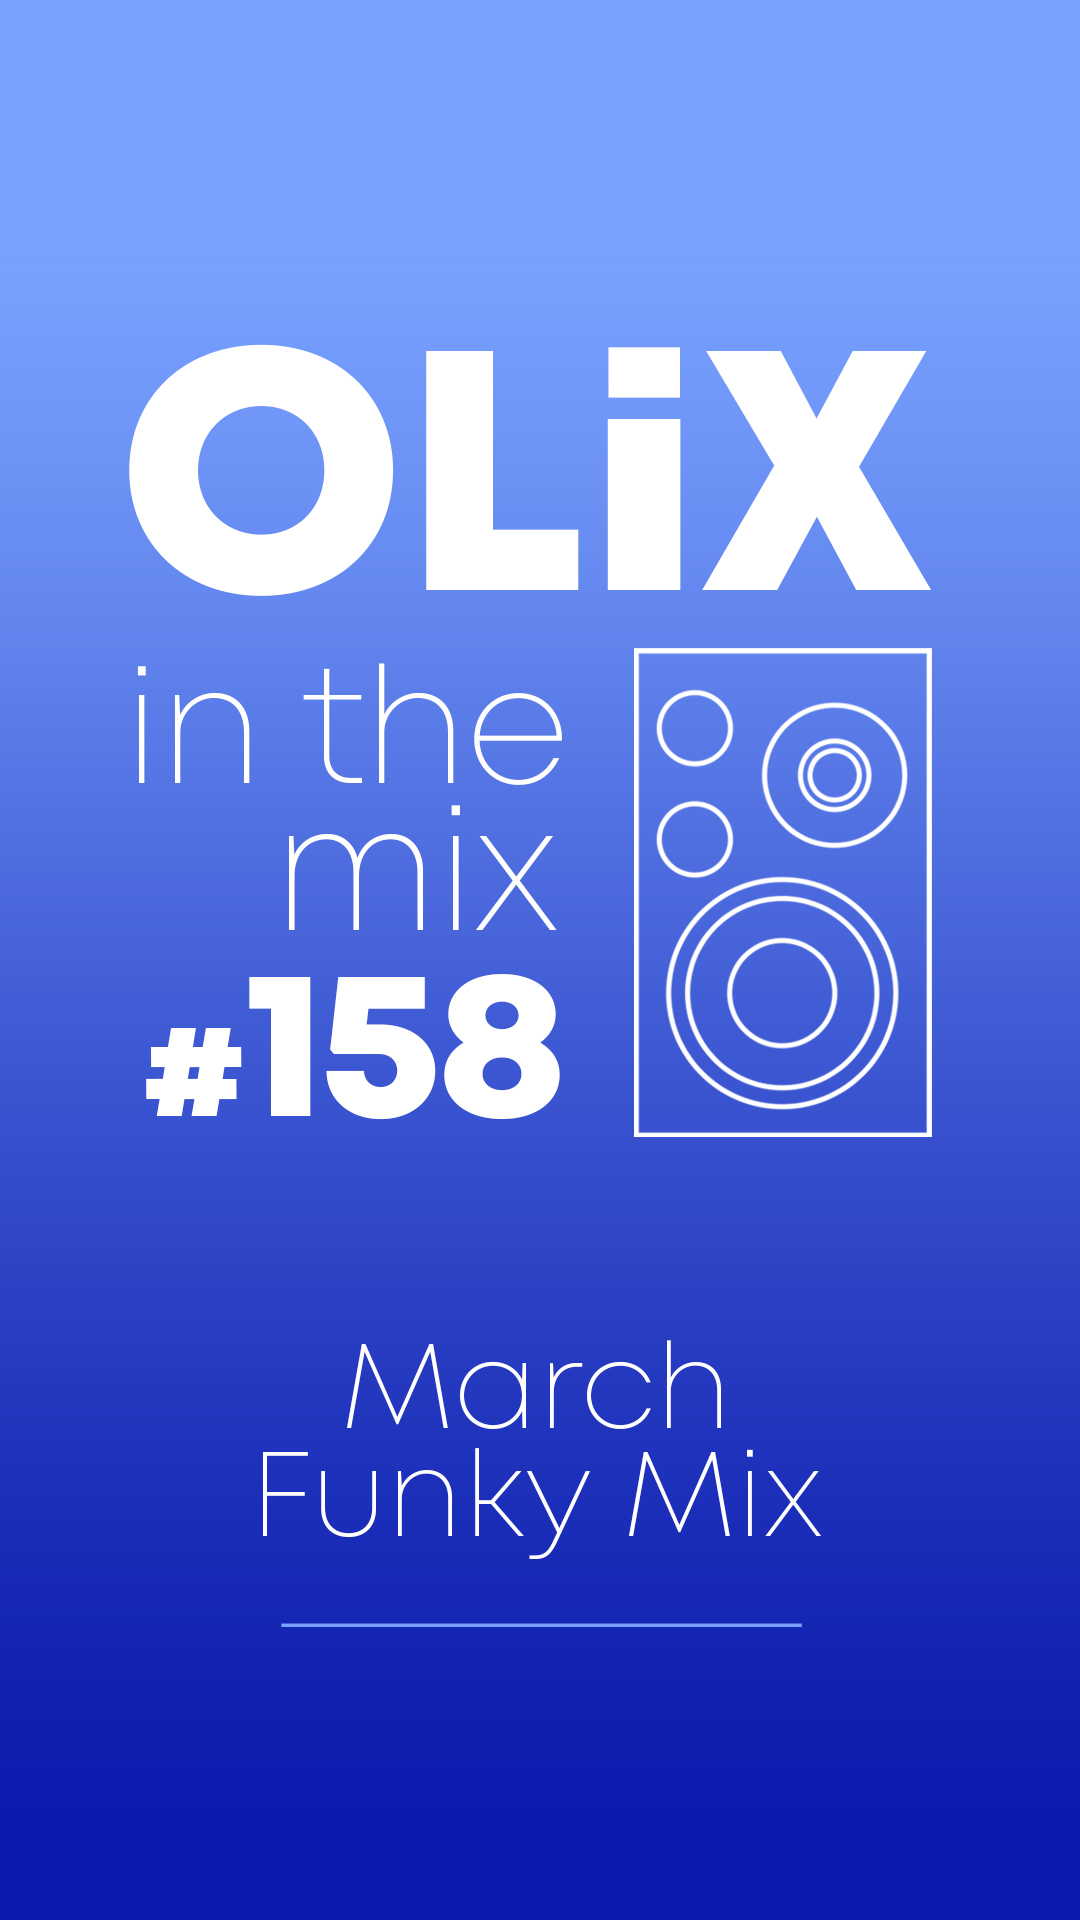 OLiX in the Mix - 158 - March Funky Mix